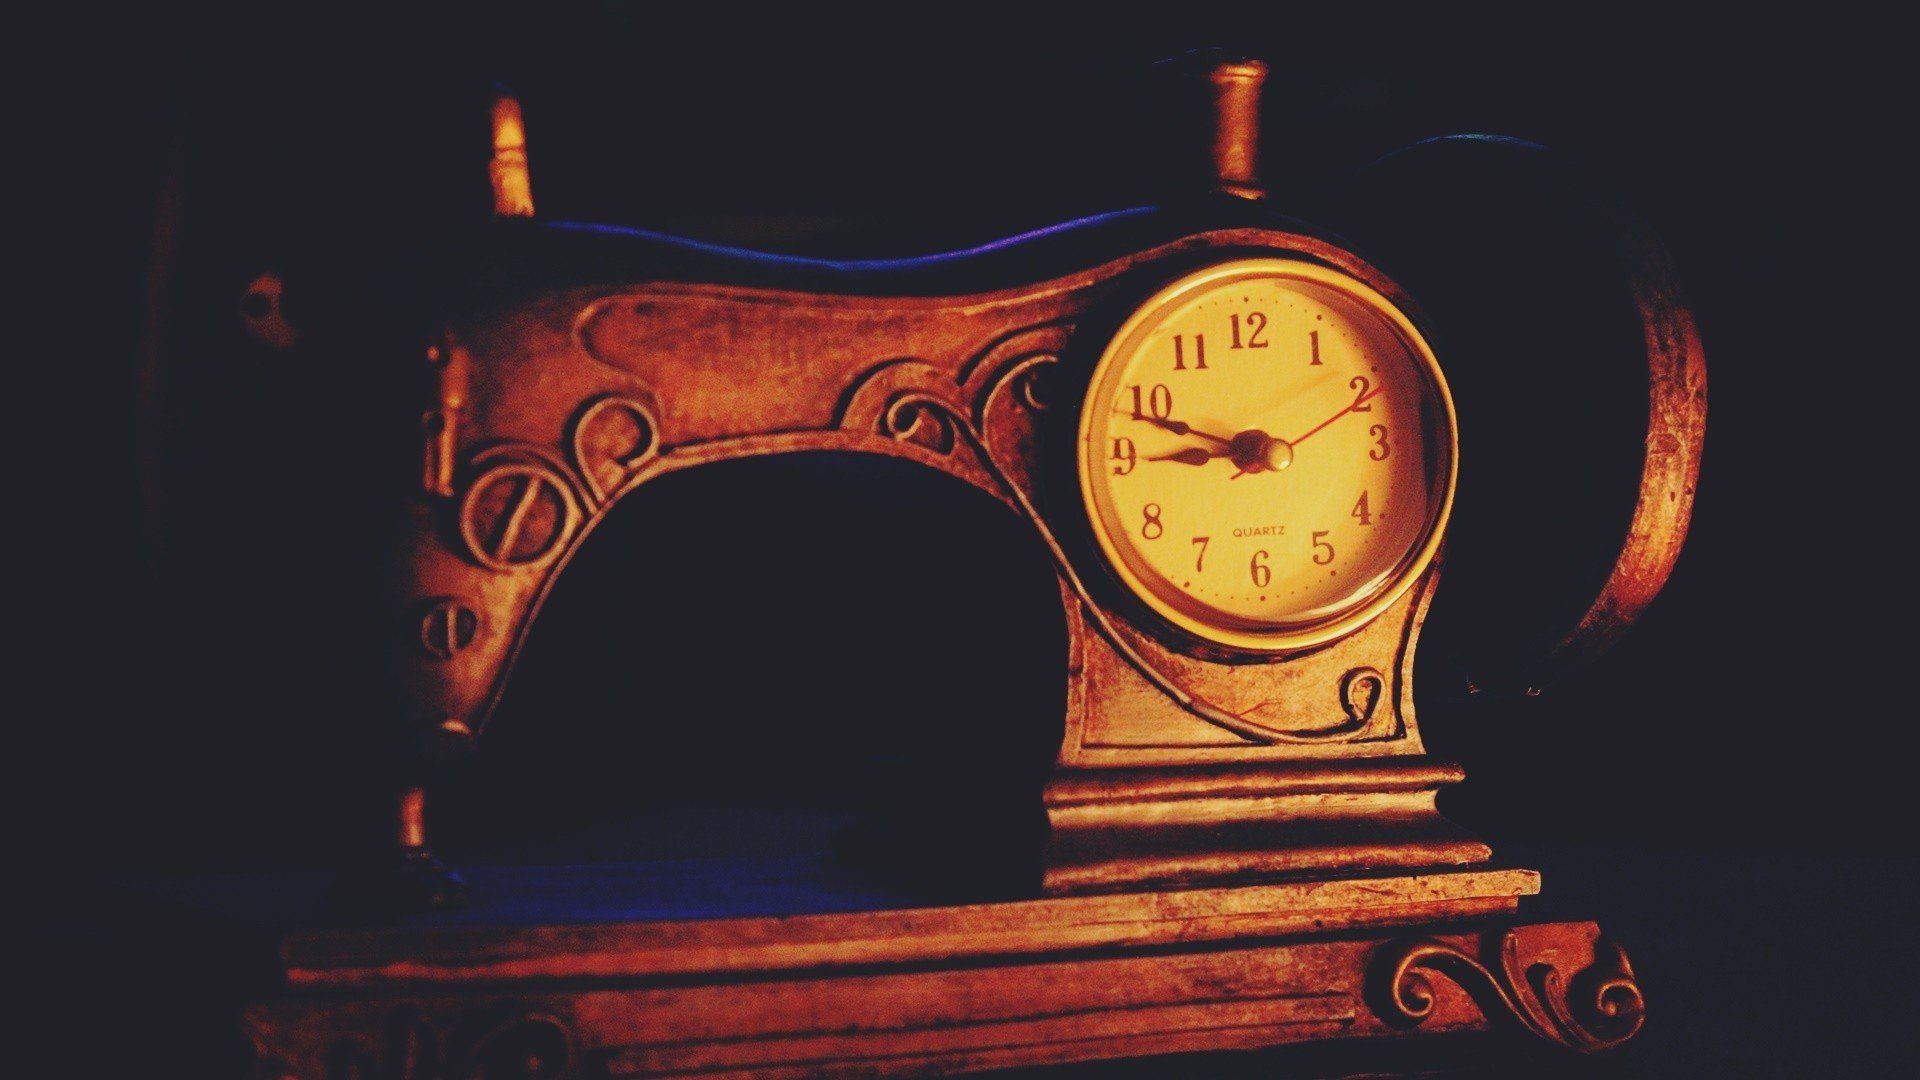 vintage, Old, Clocks, Antiques, Night, Retro style Wallpaper HD / Desktop and Mobile Background